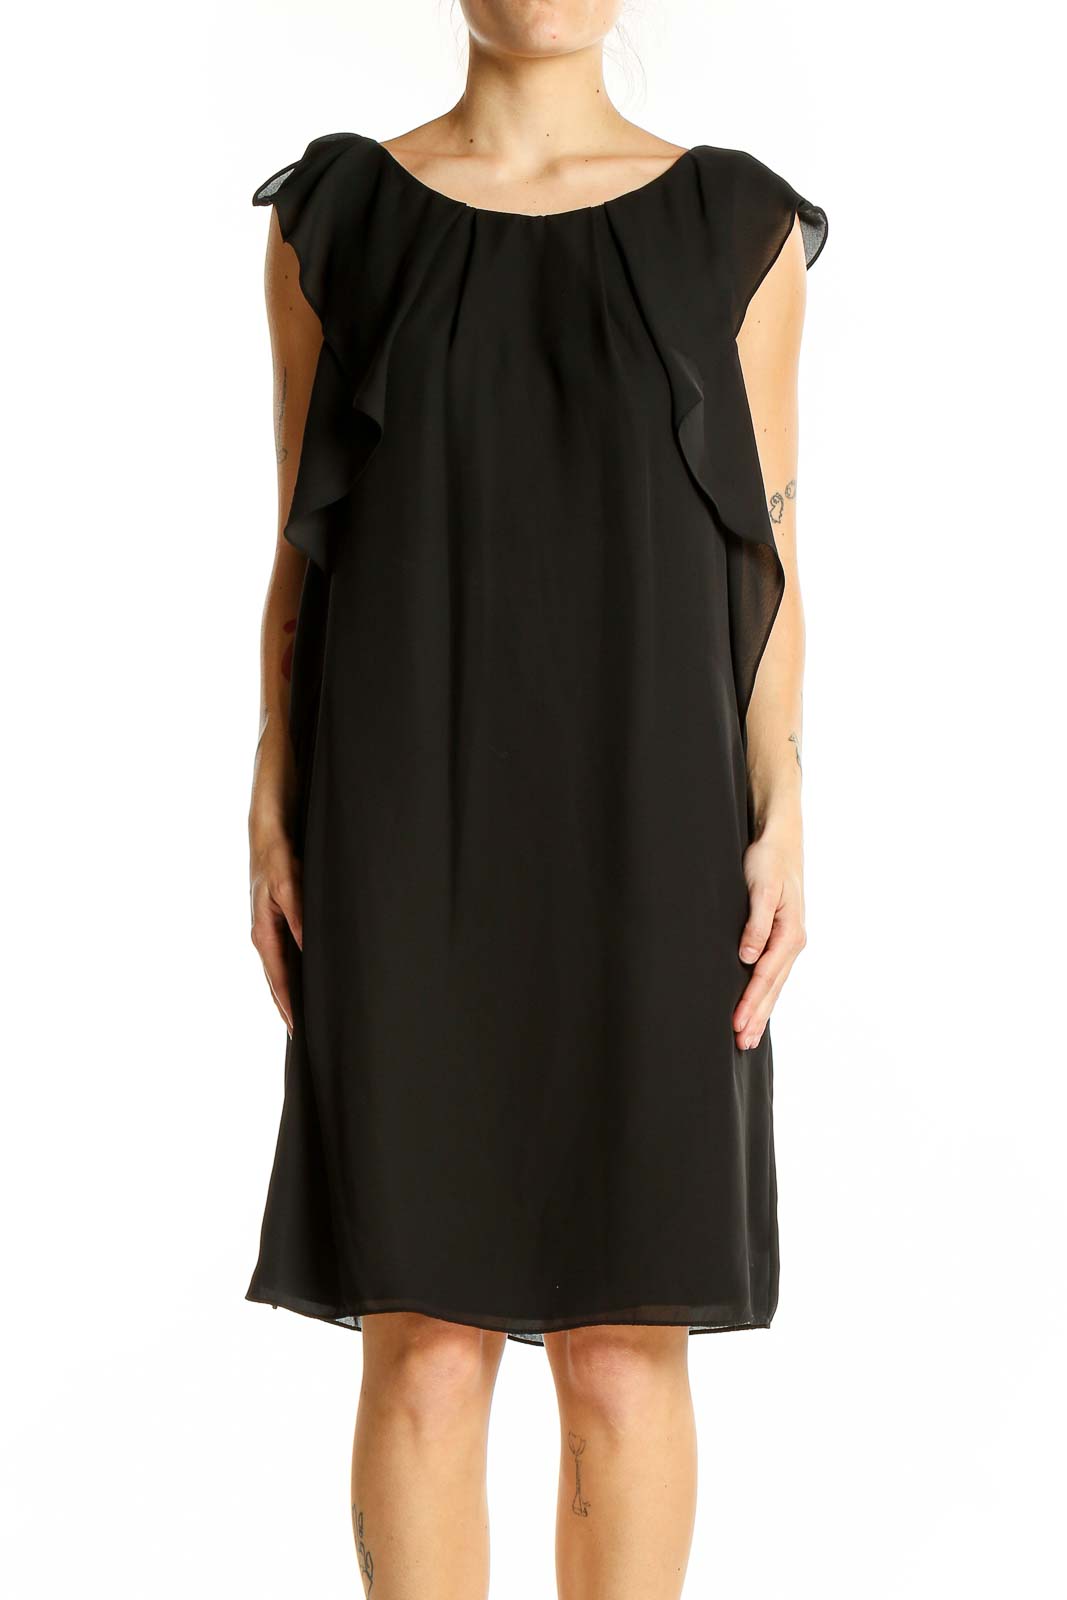 Black All Day Wear Classic Solid Dress Front